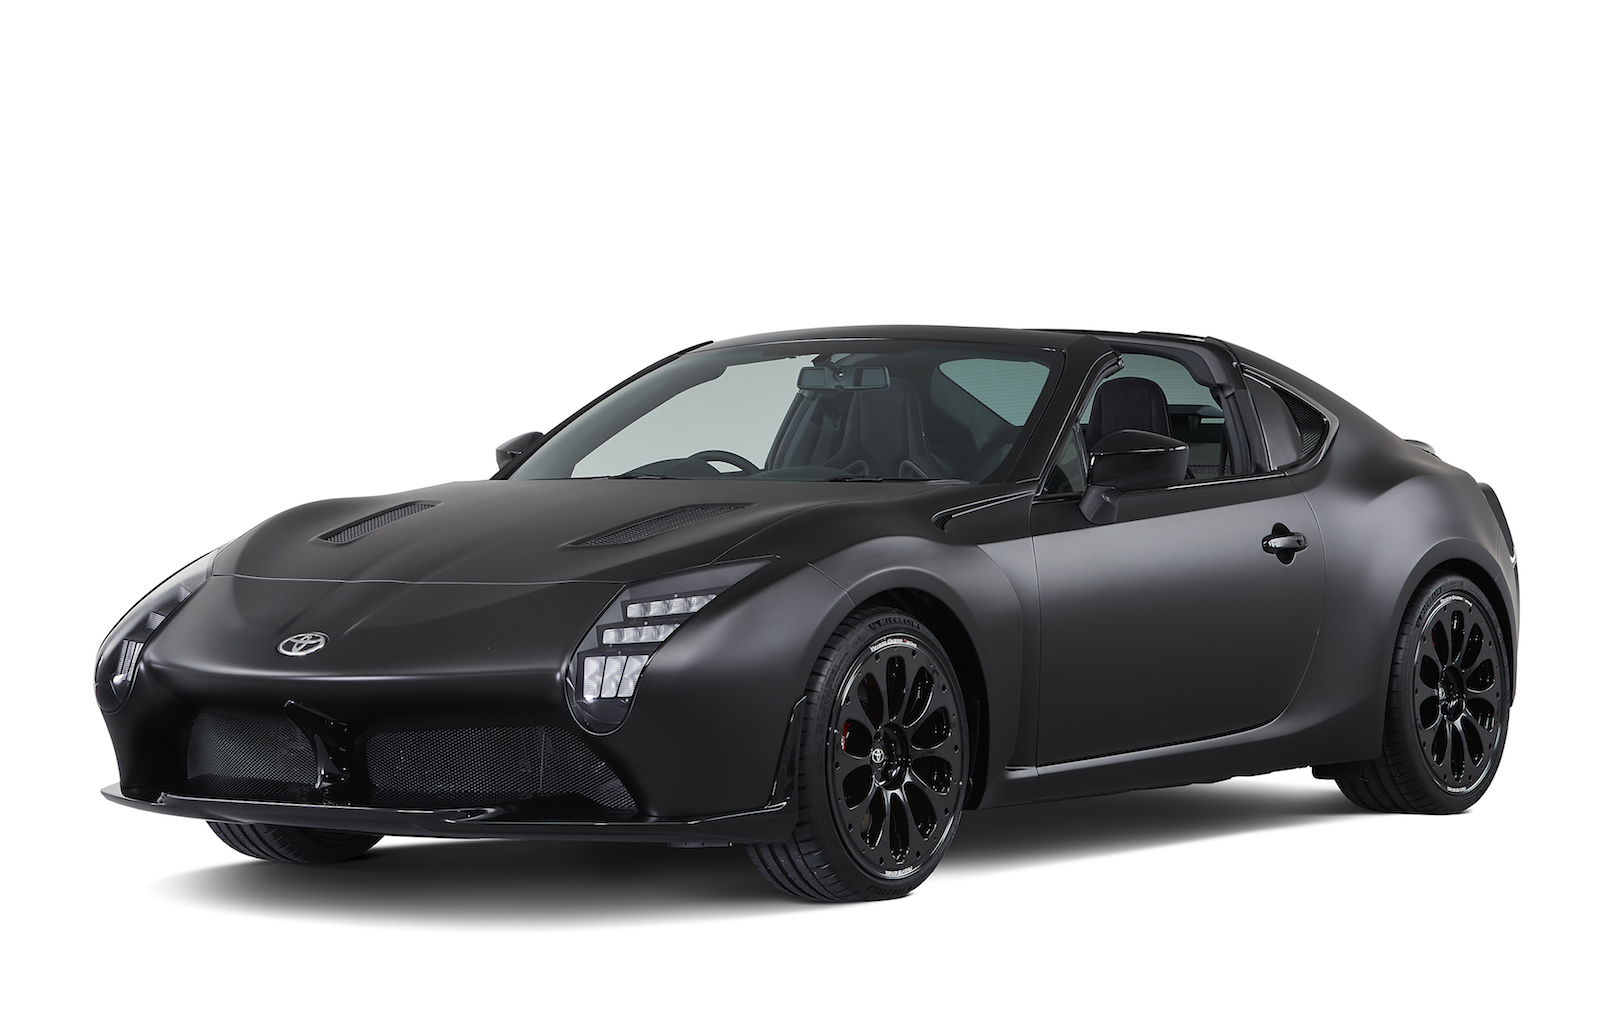 Toyota GR HV concept planned for Tokyo, previews new Supra?